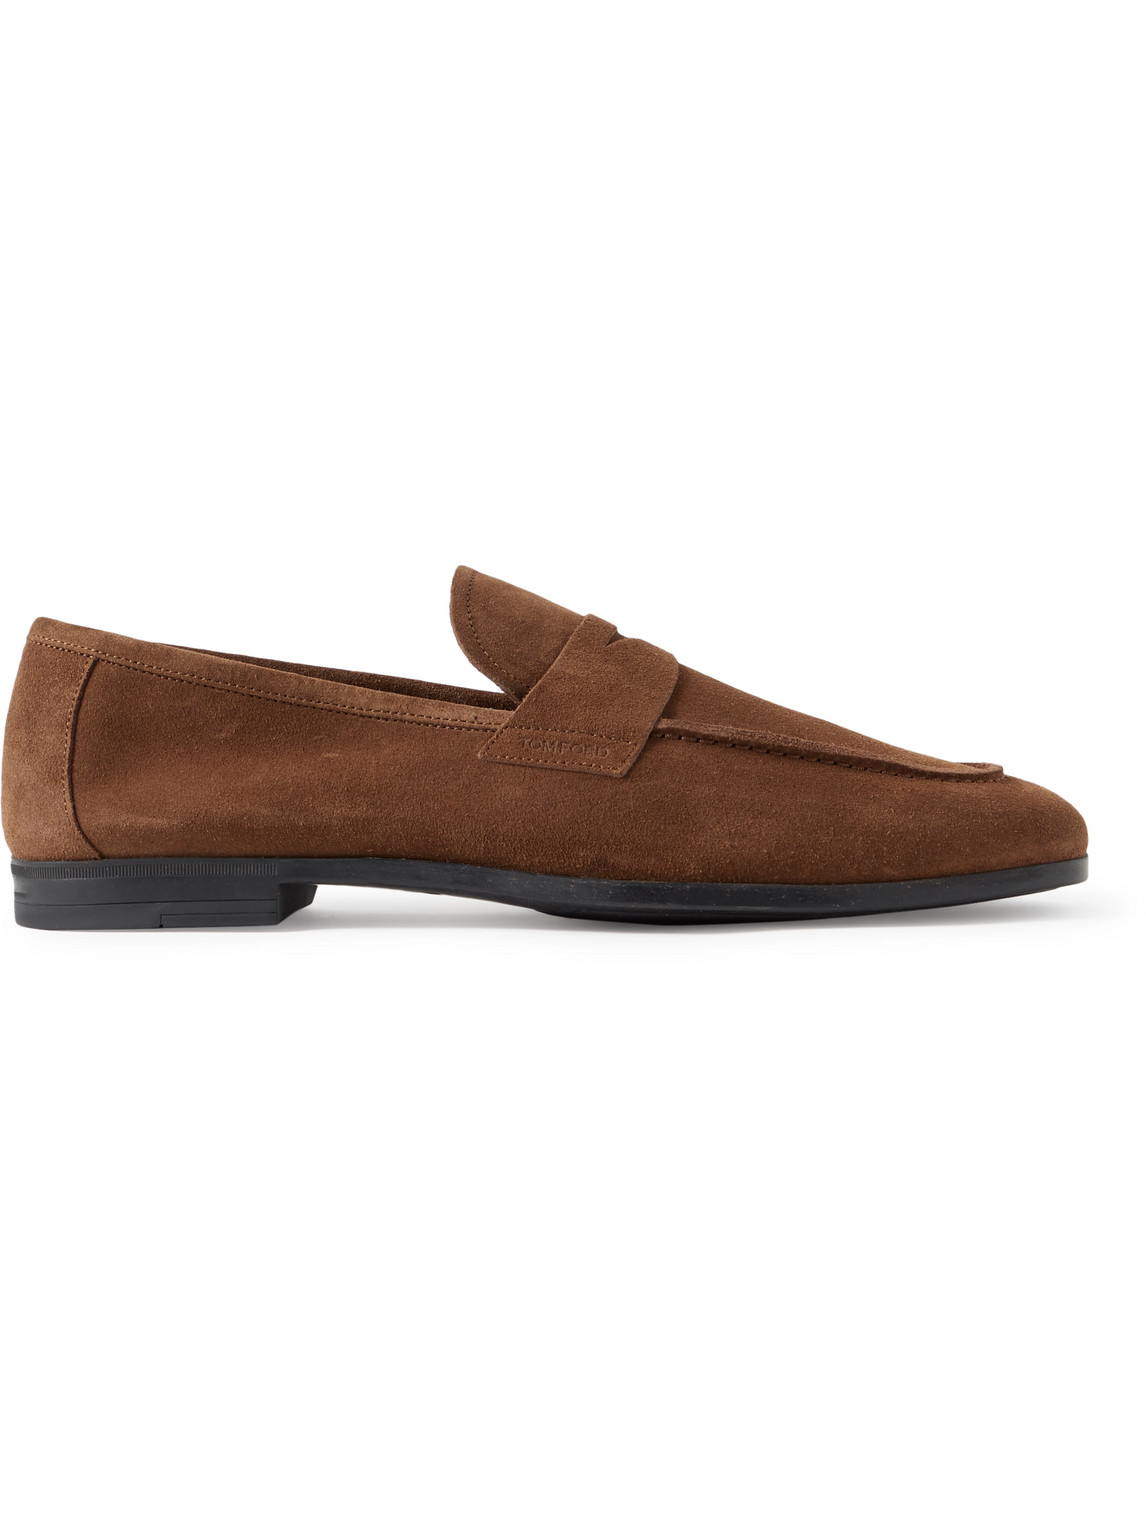 TOM FORD SEAN SUEDE PENNY LOAFERS